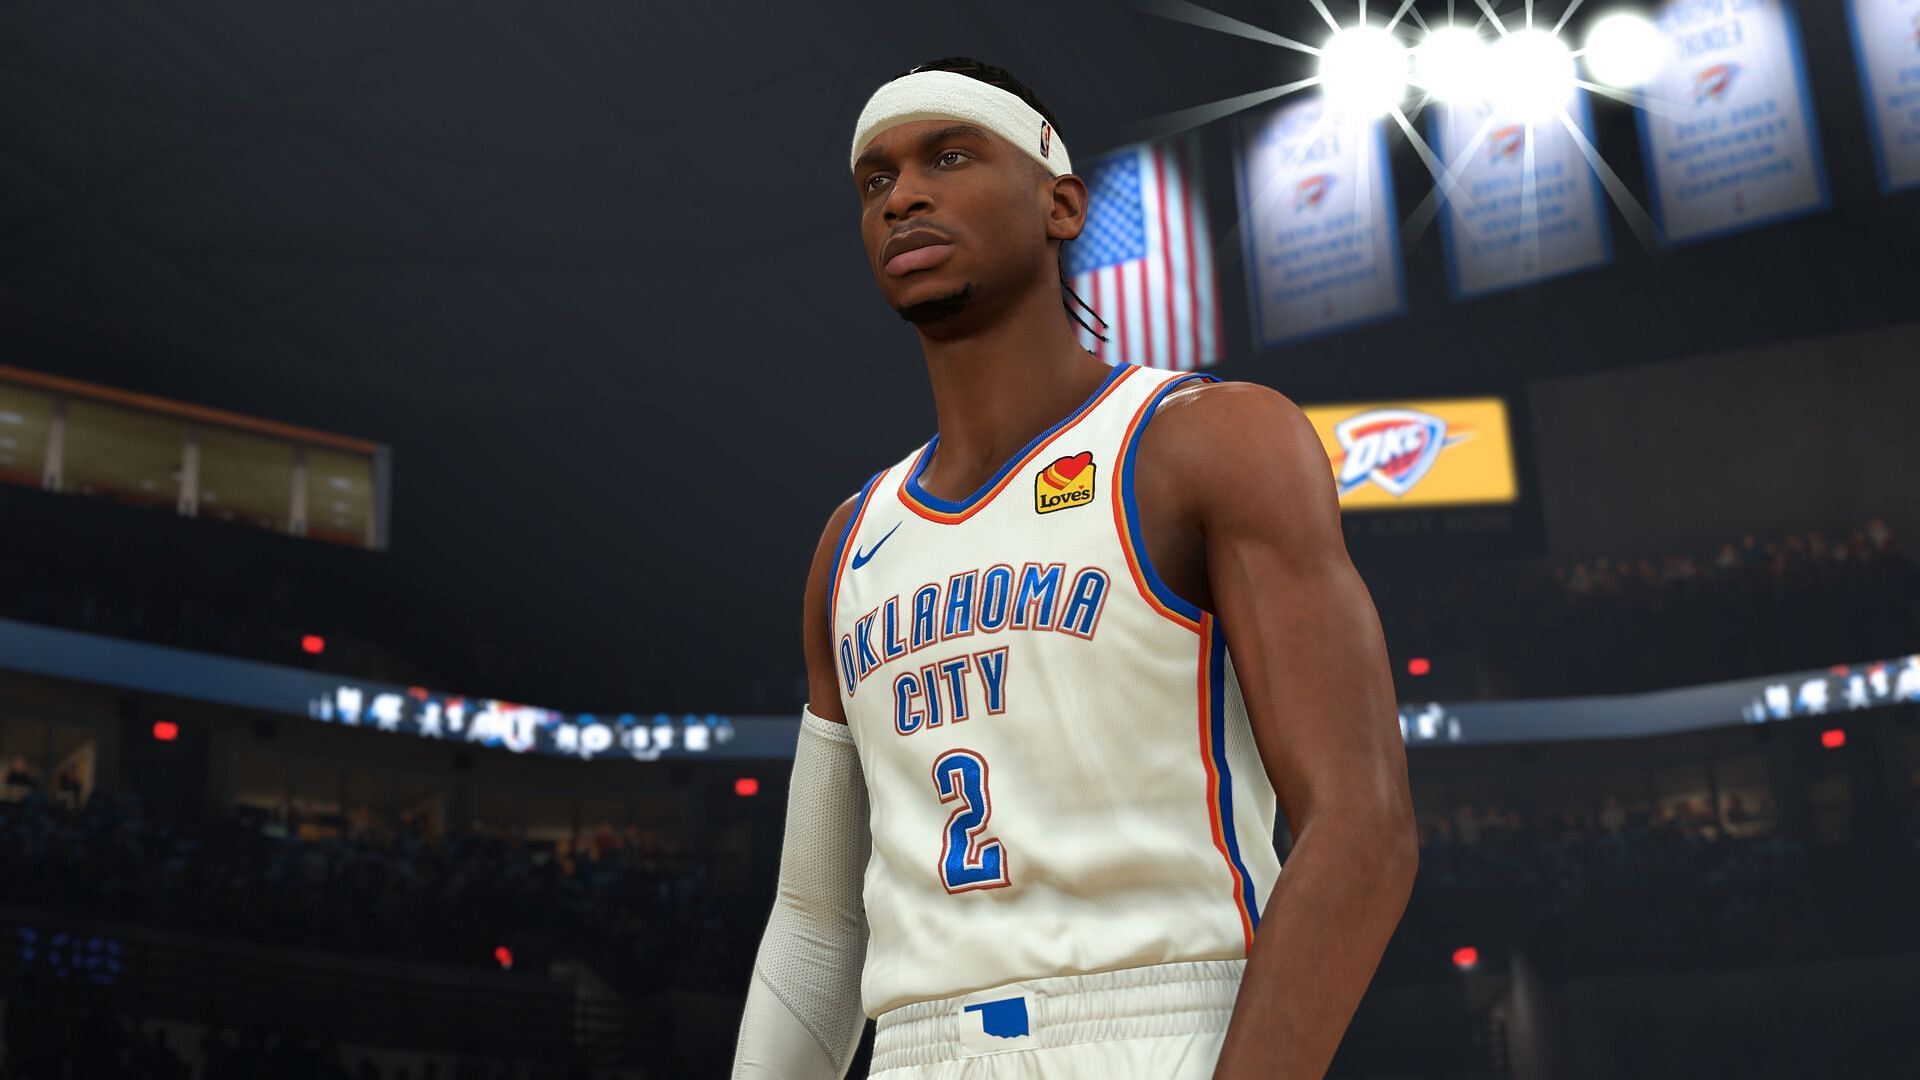 NBA 2K24 servers are reportedly down (Image 2K Sports)